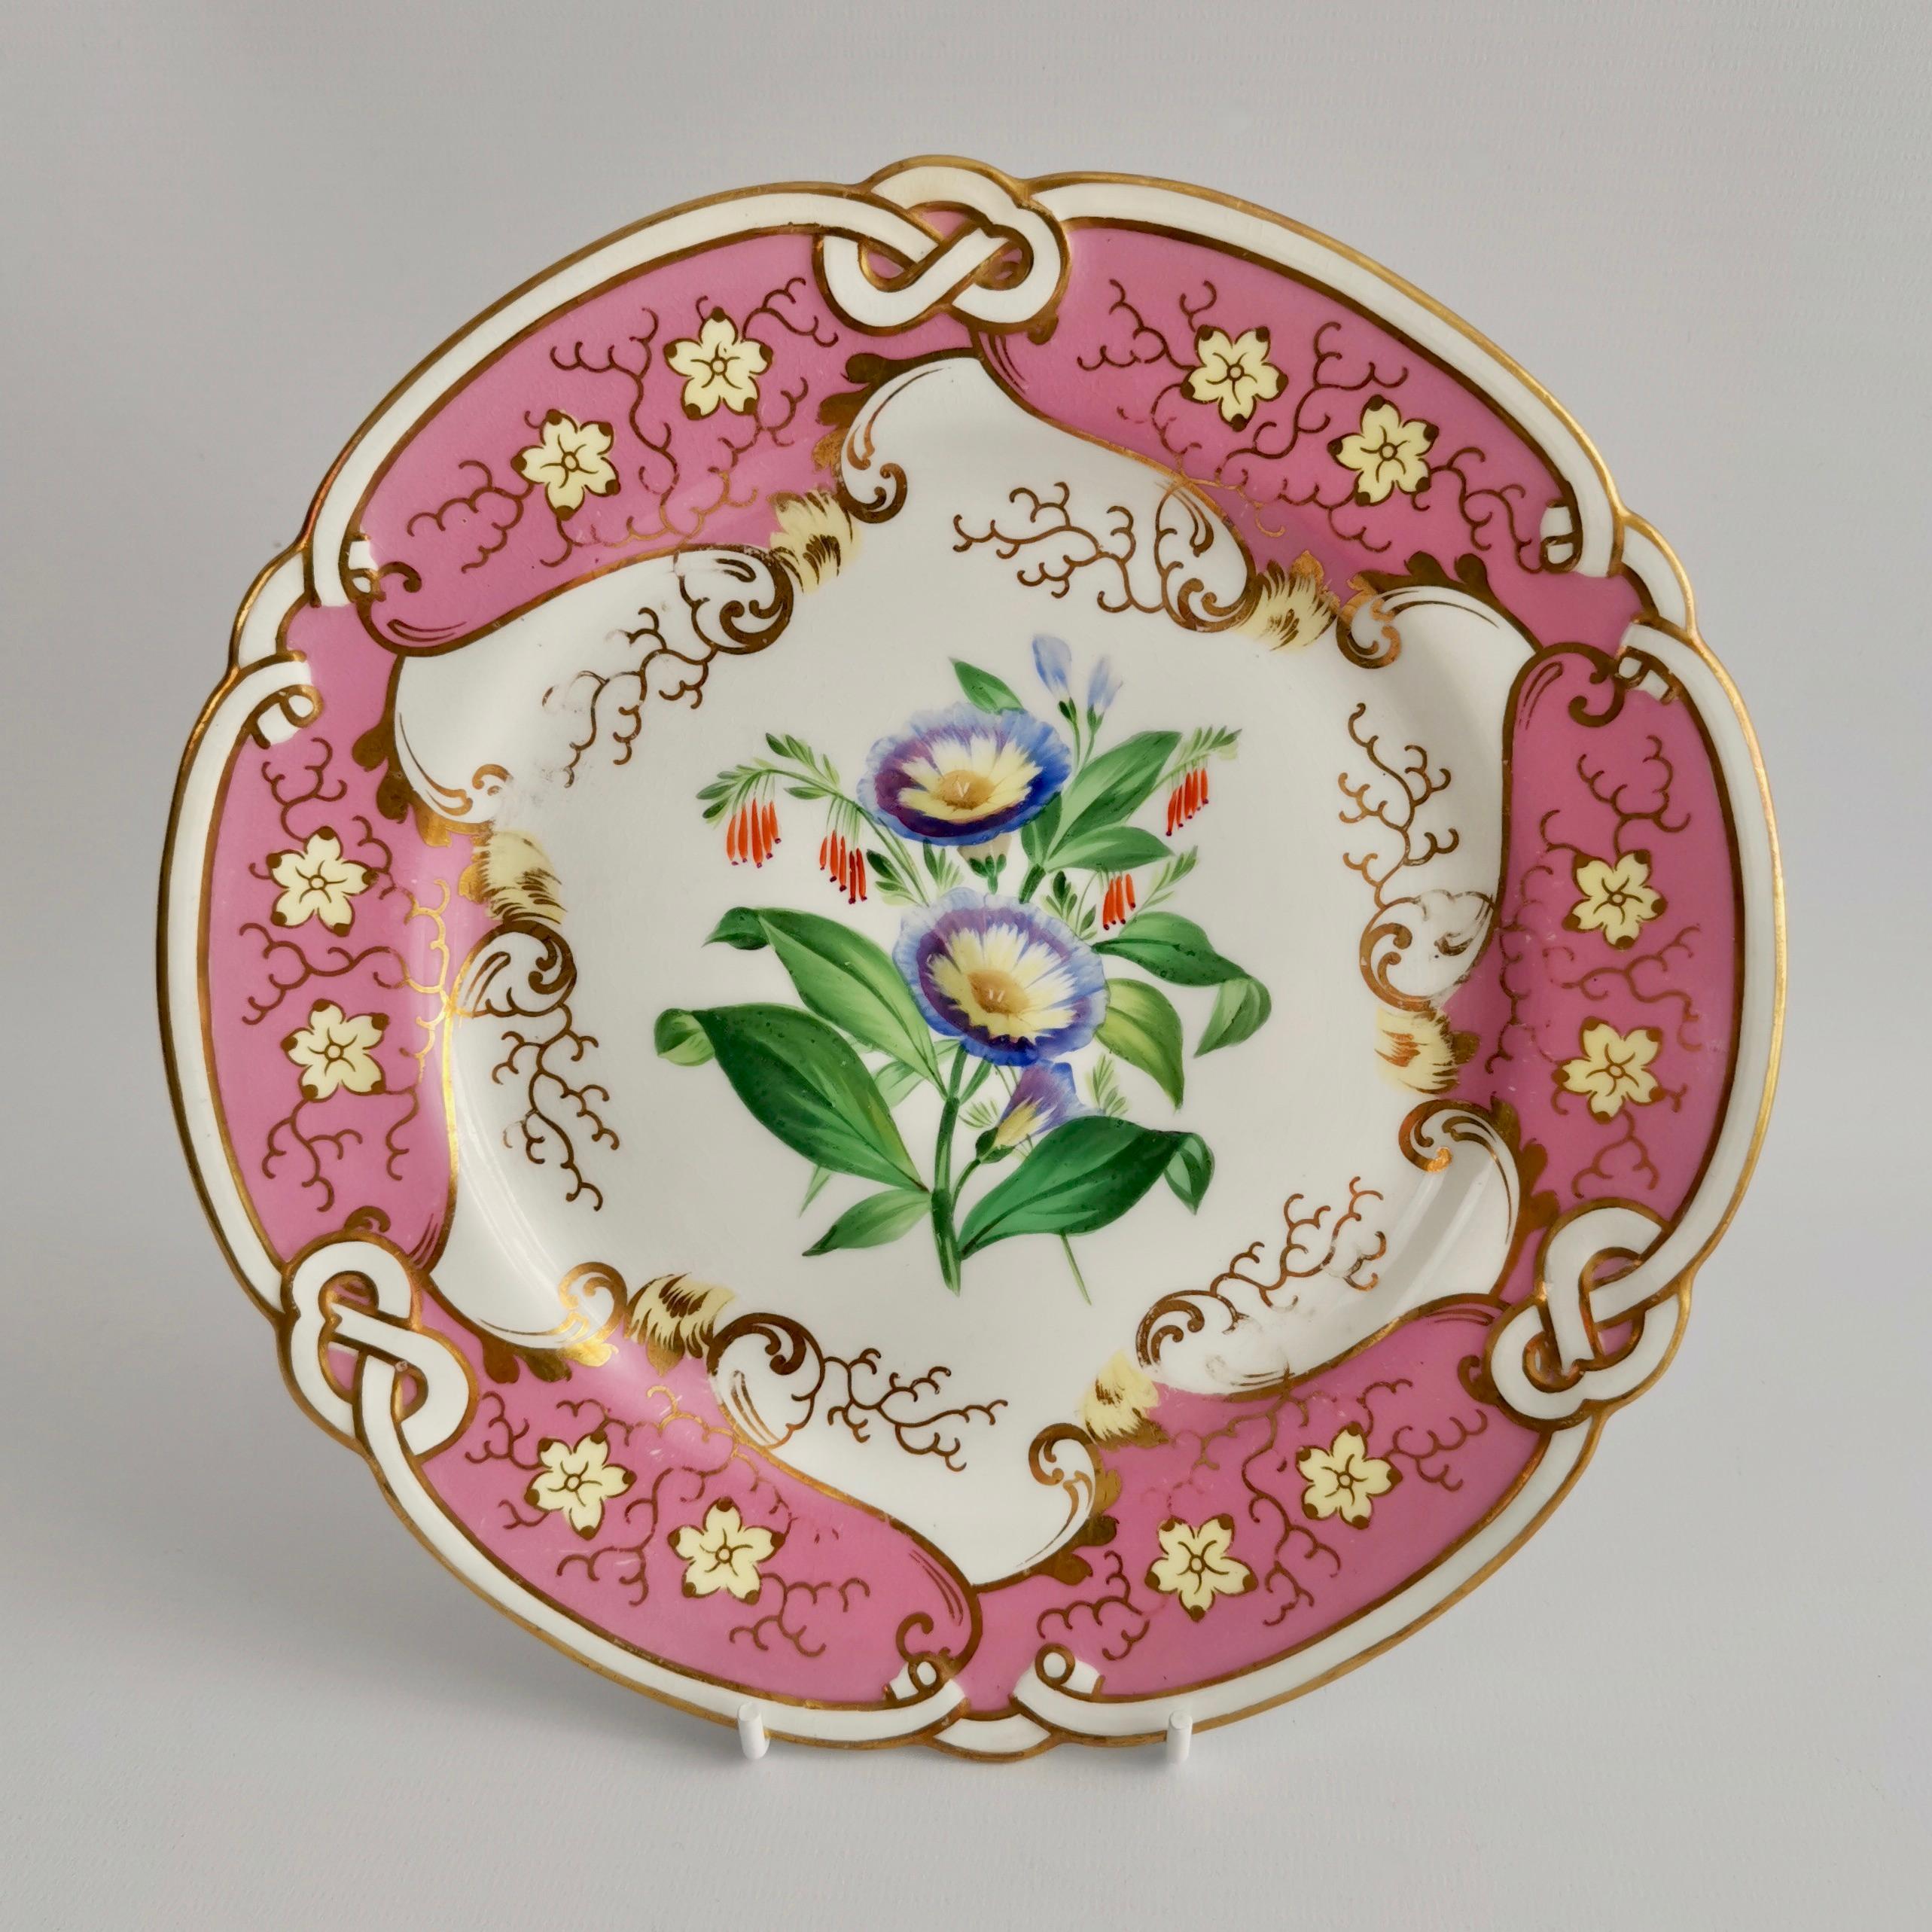 Mid-19th Century Samuel Alcock Small Porcelain Dessert Set, Pink with Flowers, Victorian 1854